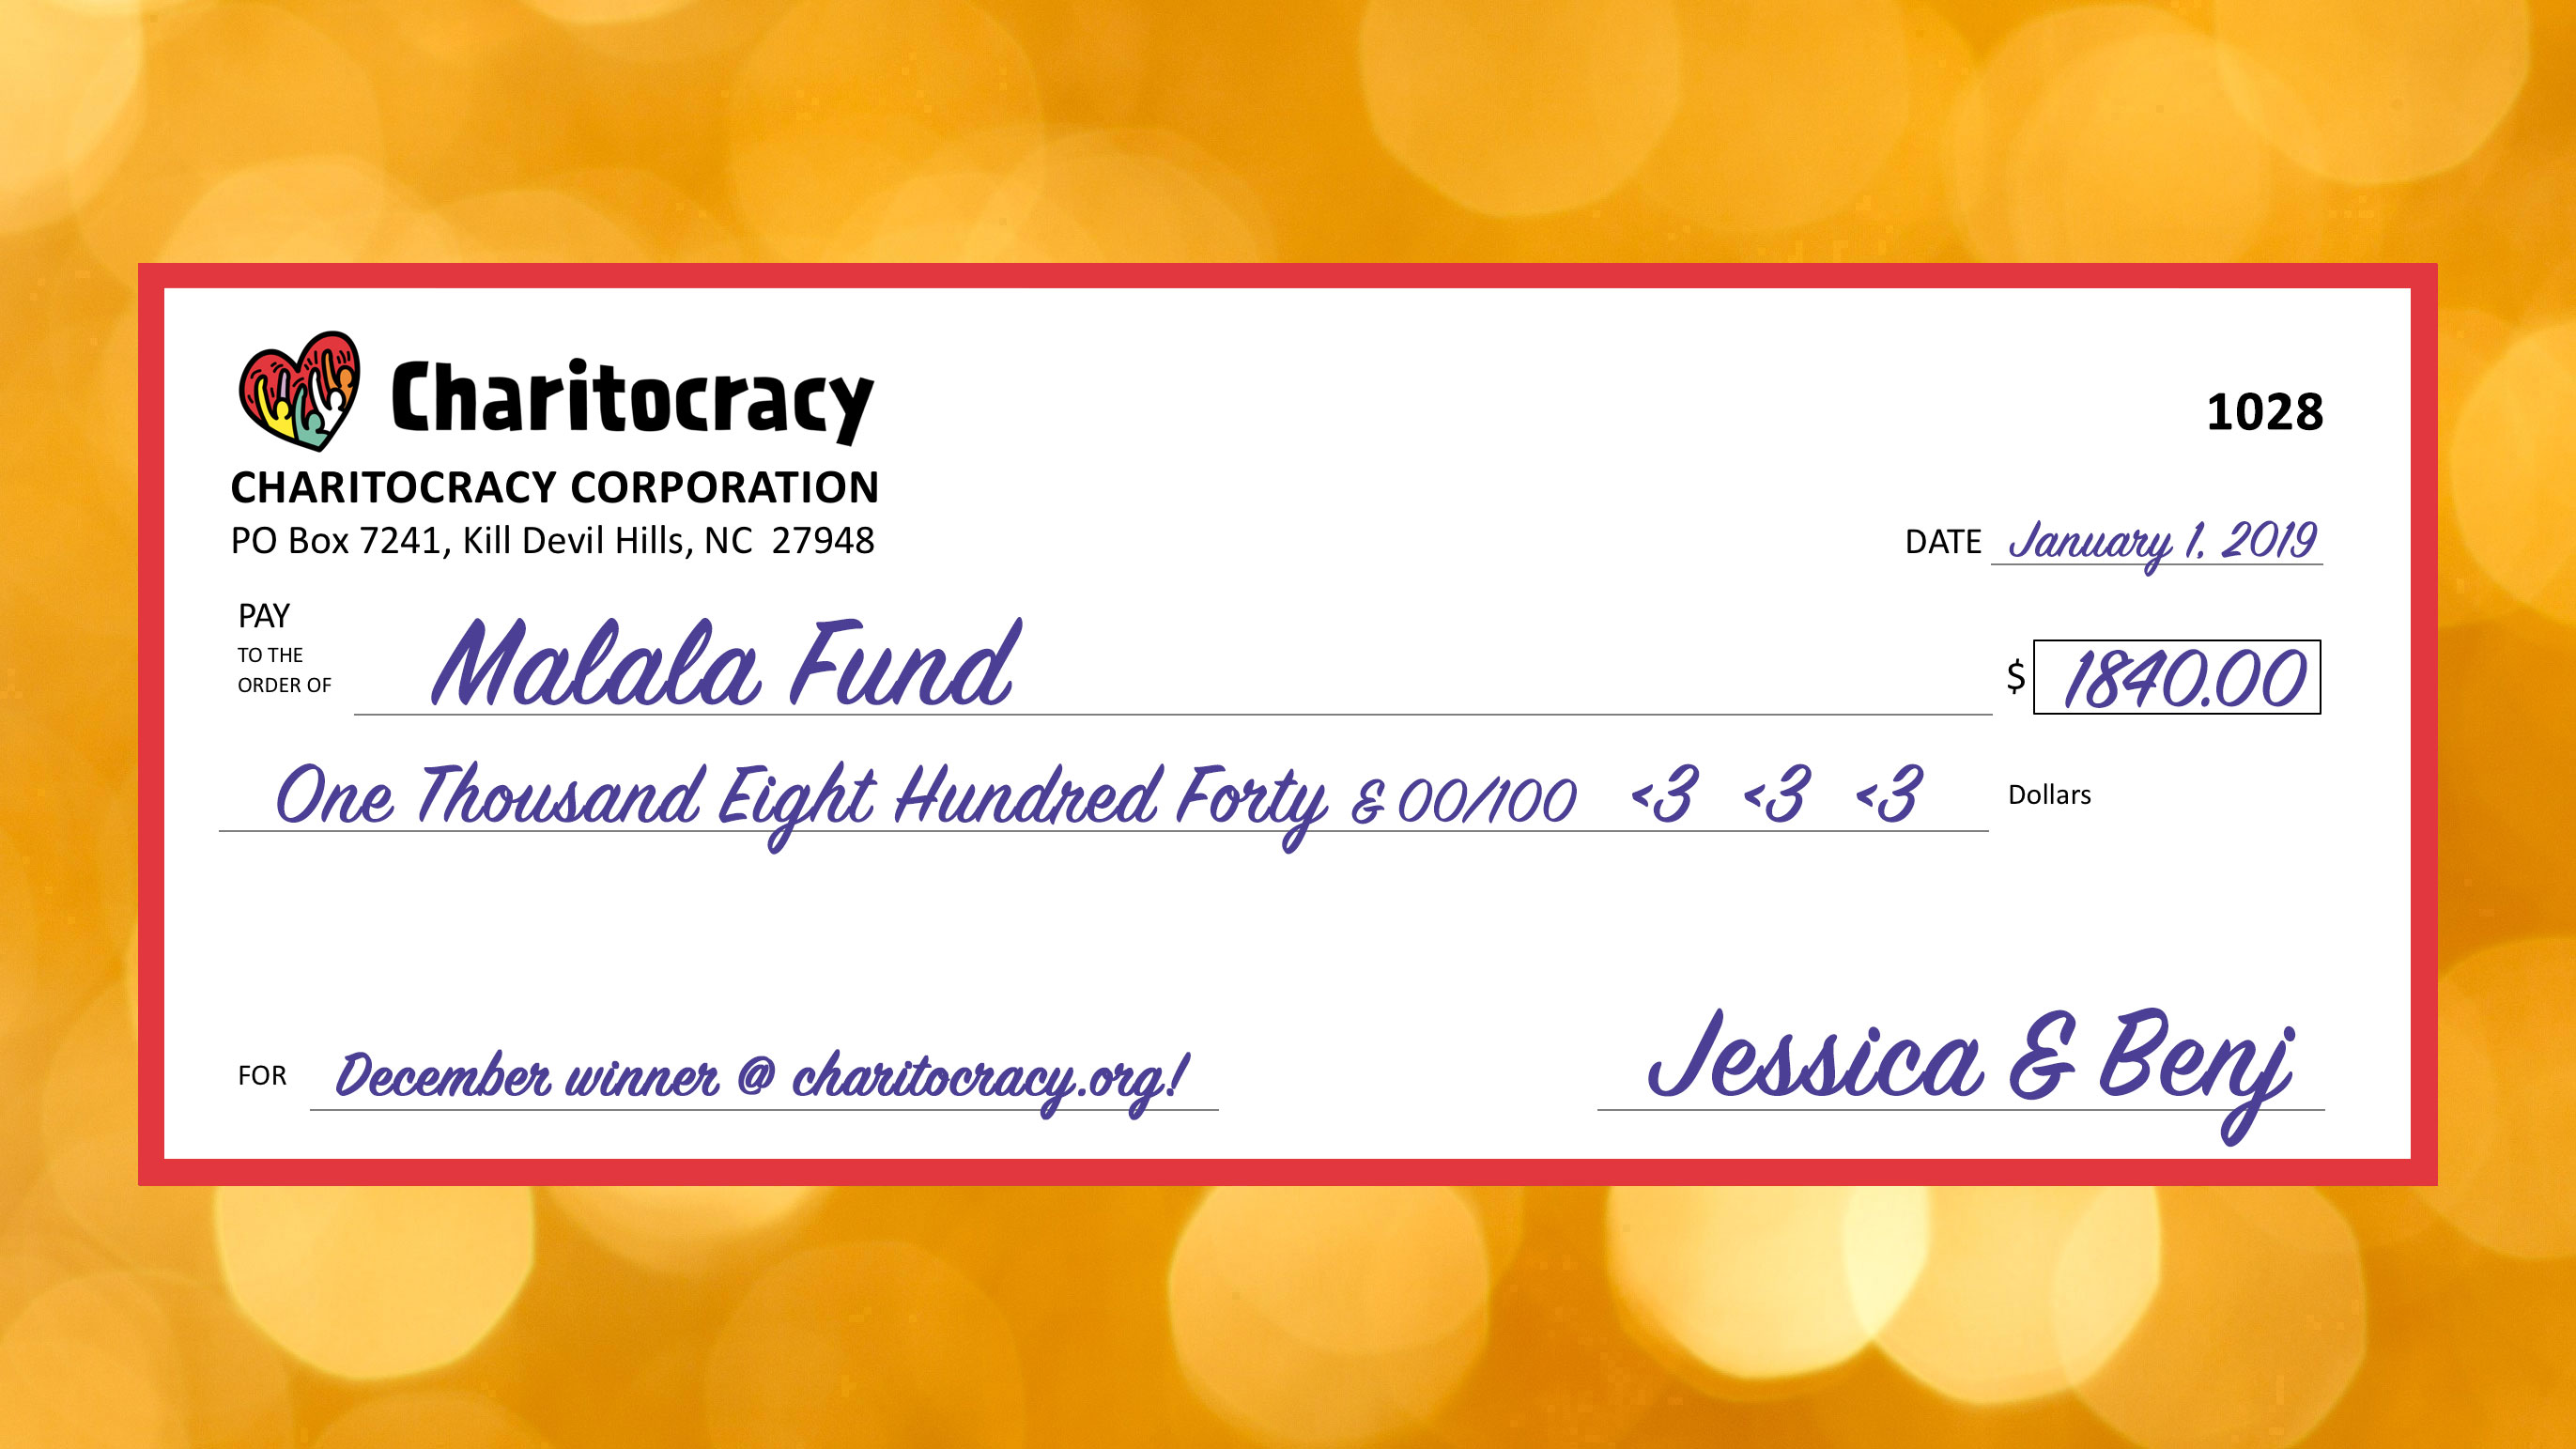 Charitocracy's 28th check to December winner Malala Fund for $1840